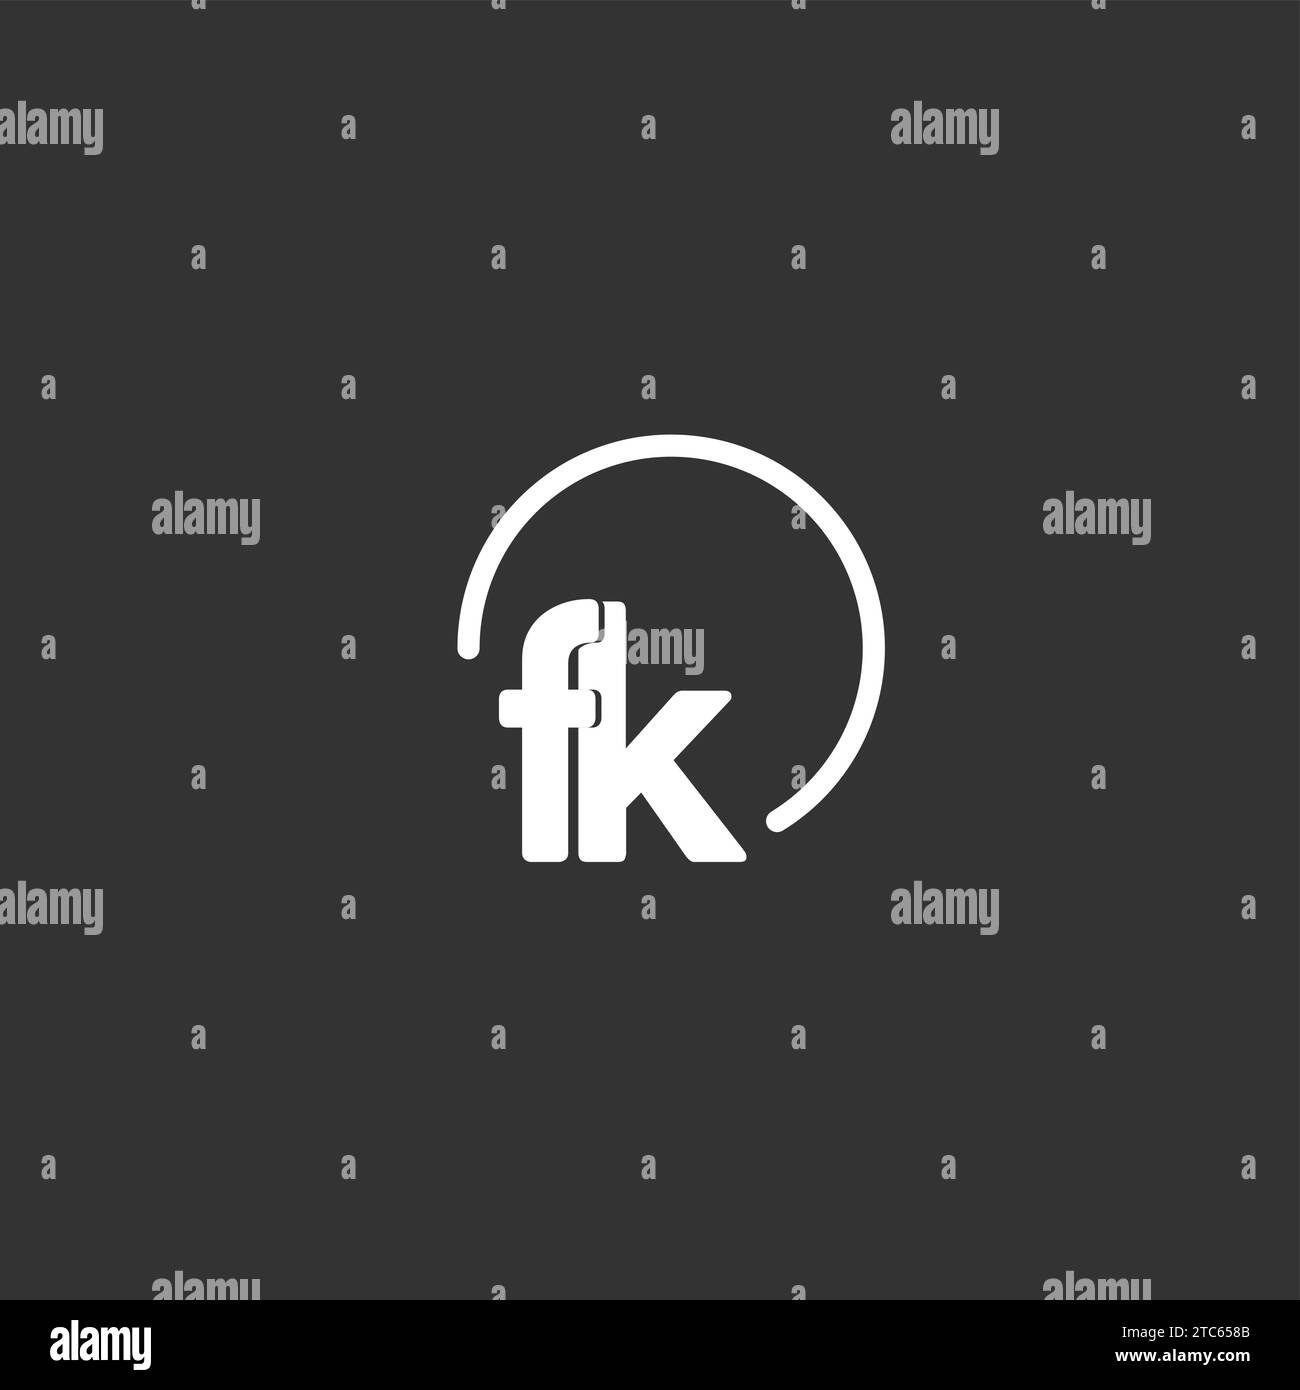 FK initial logo with rounded circle vector graphic Stock Vector